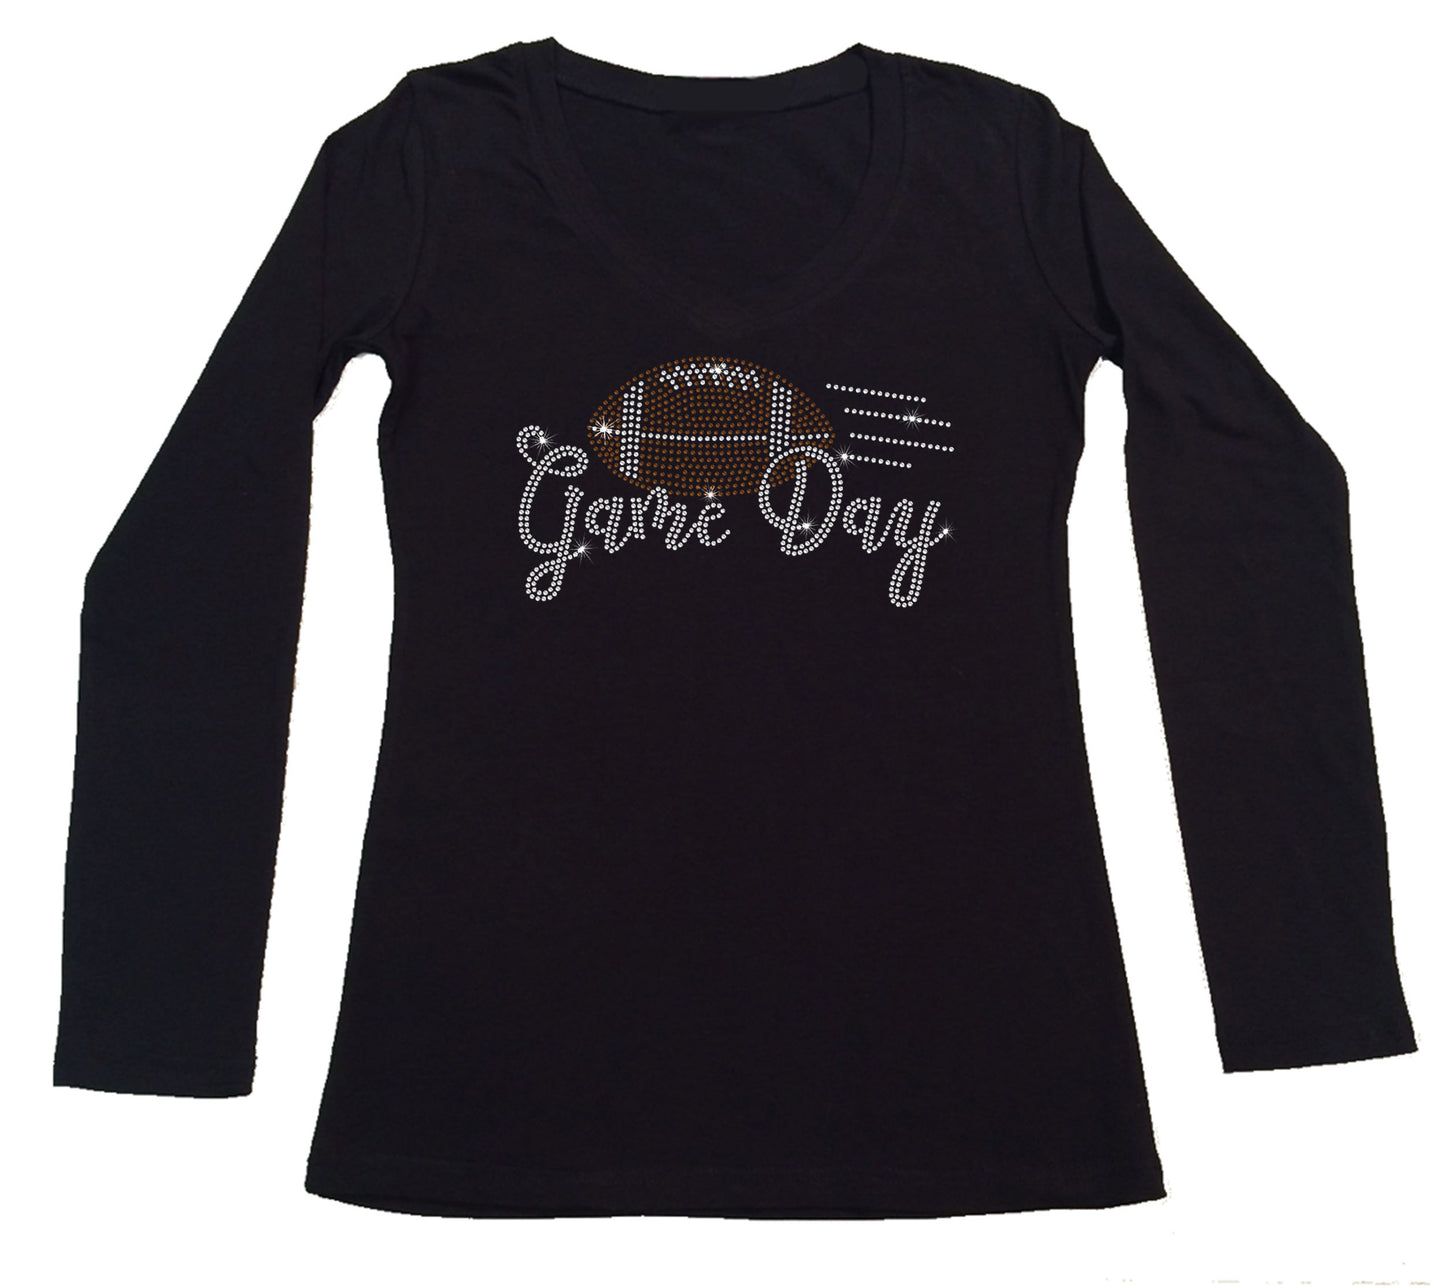 Womens T-shirt with Game Day Football in Rhinestones